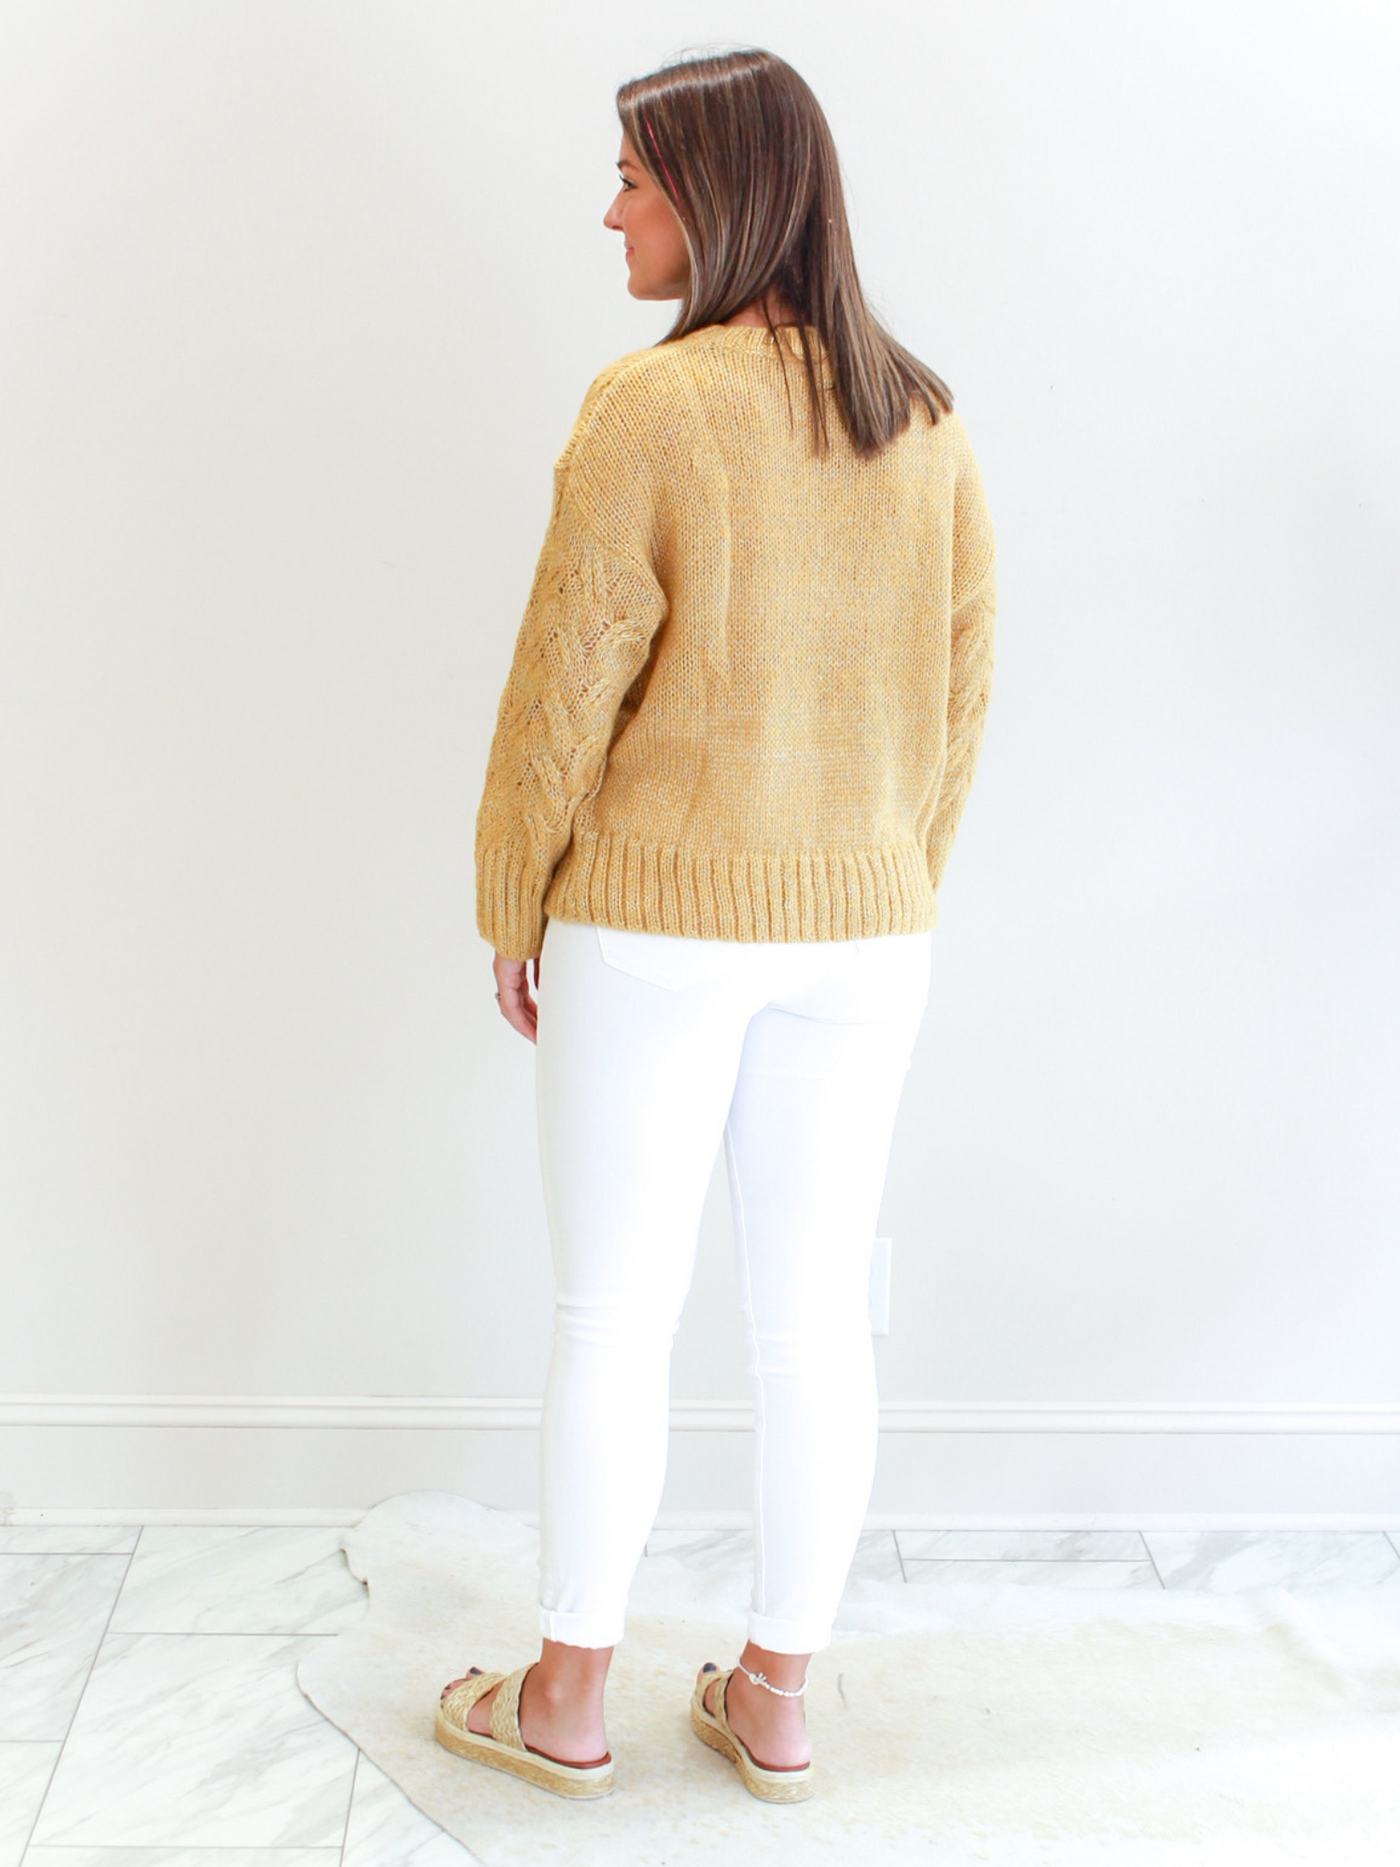 Gold Cable Knit Sweater back view with white jeans.